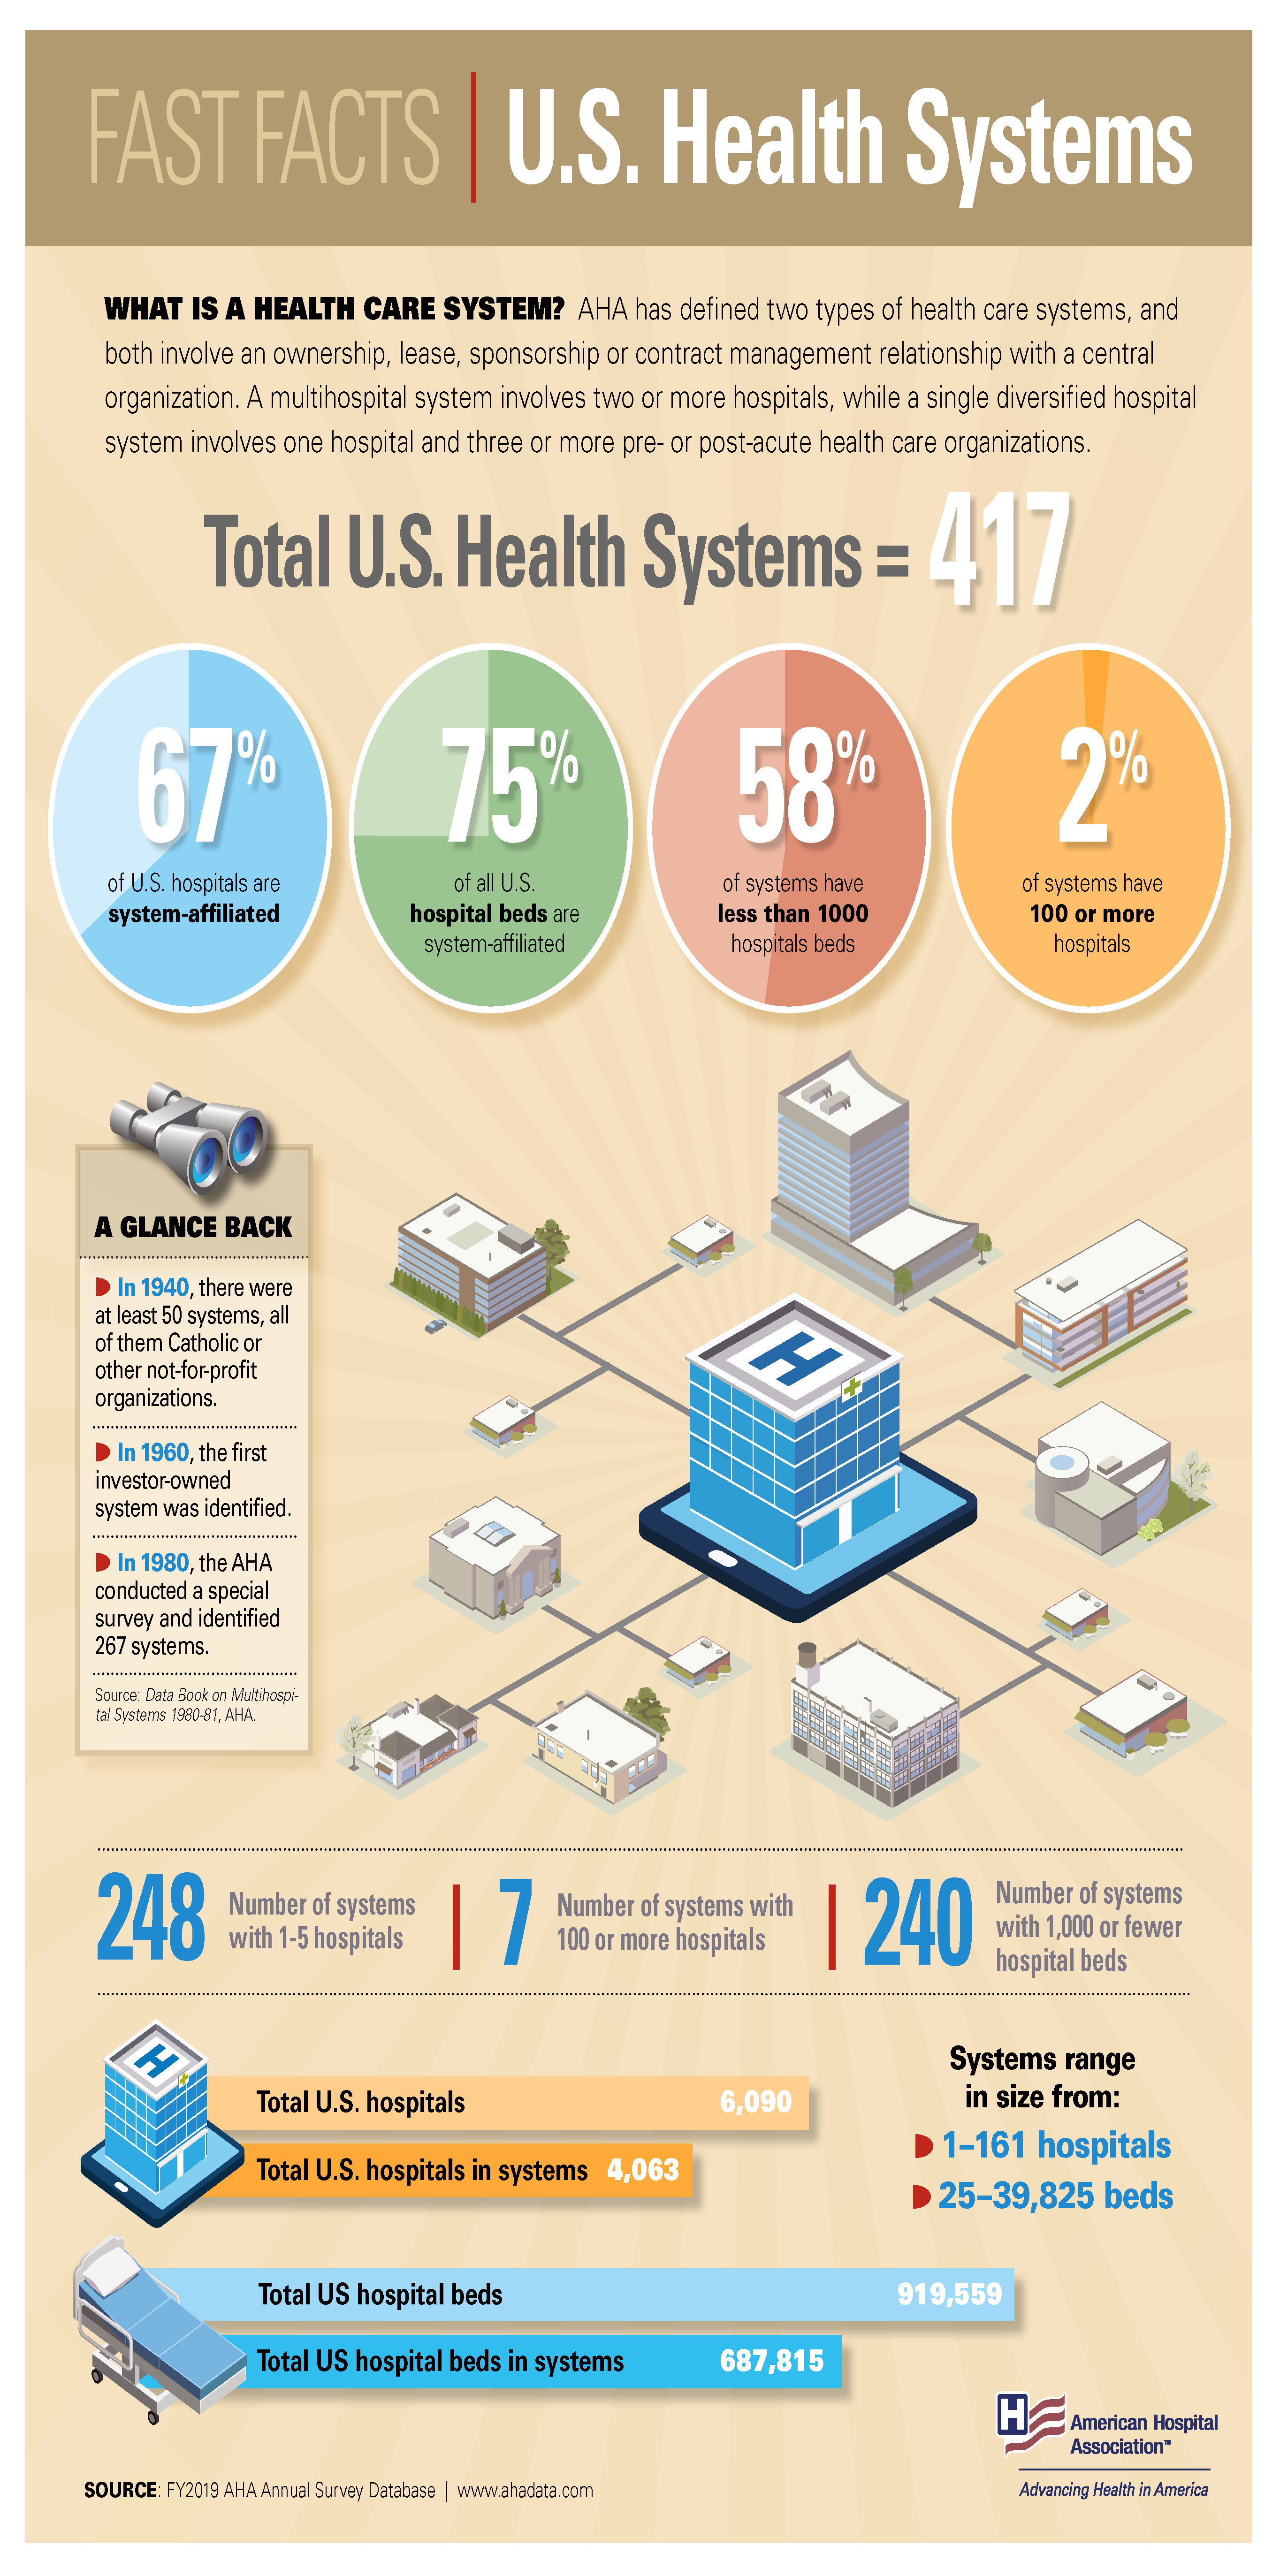 Fast Facts on US Health Systems infographic image